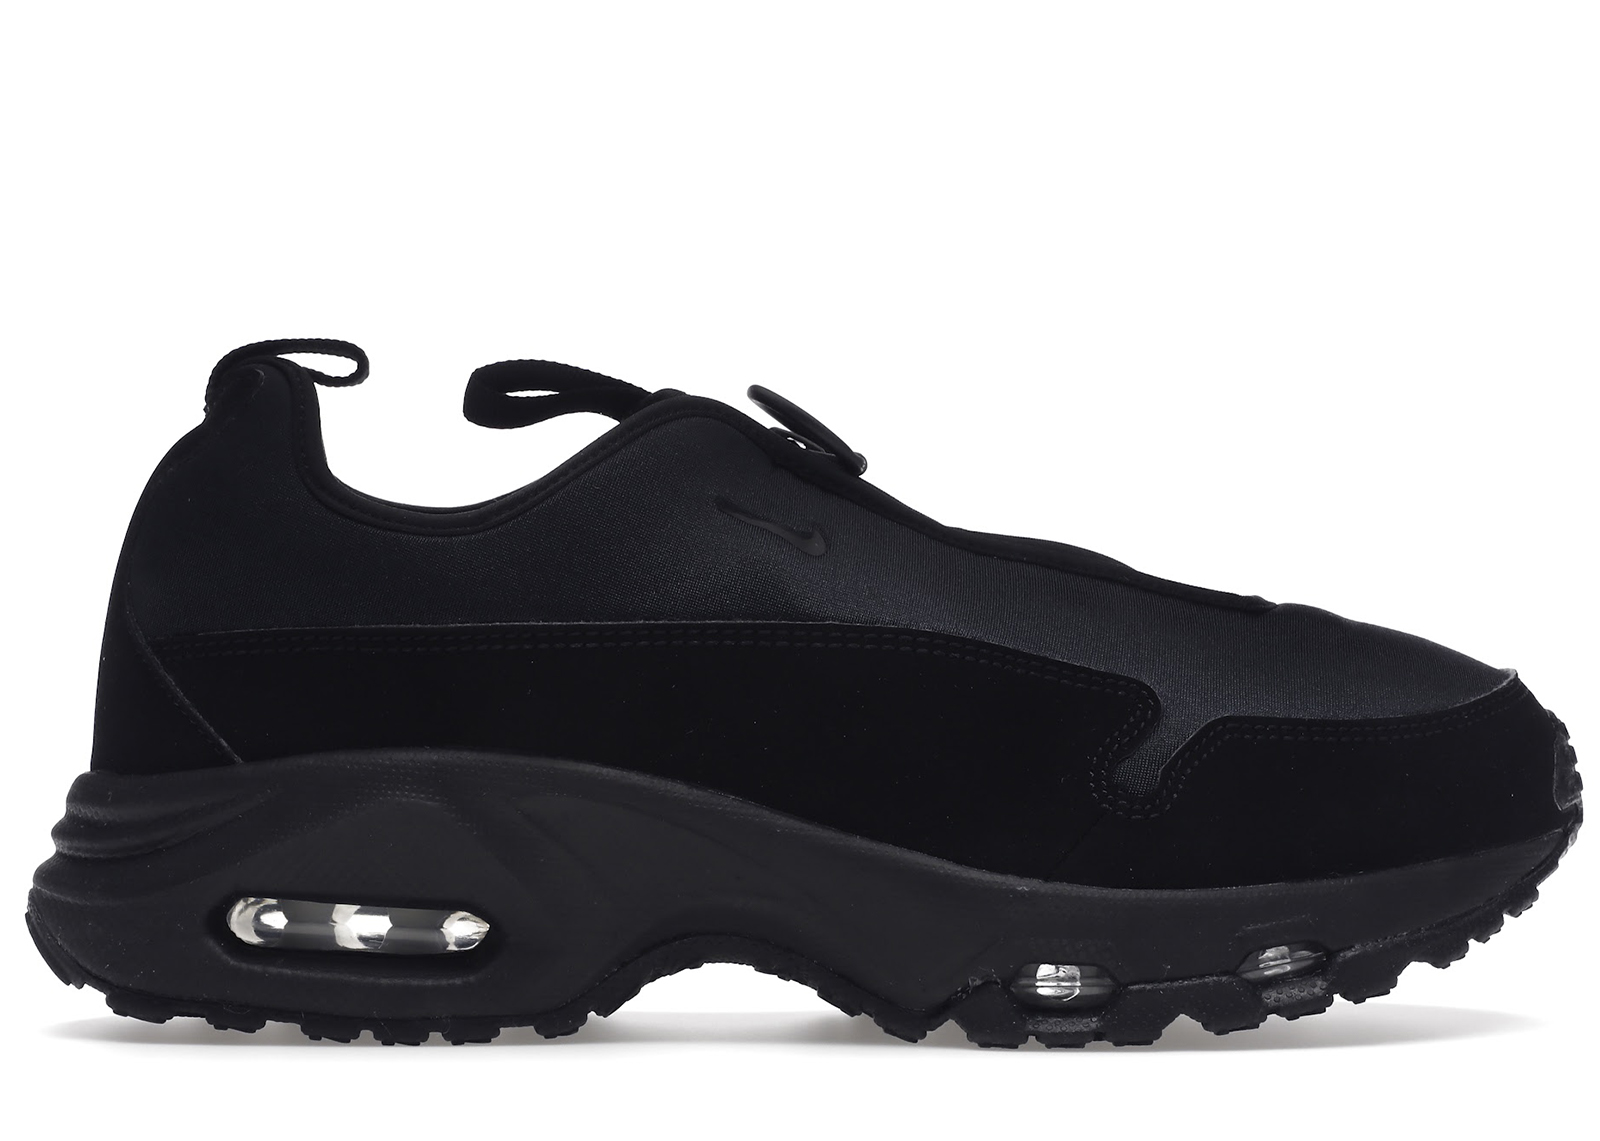 Nike Comme des garcons Air Sunder Max 27nike